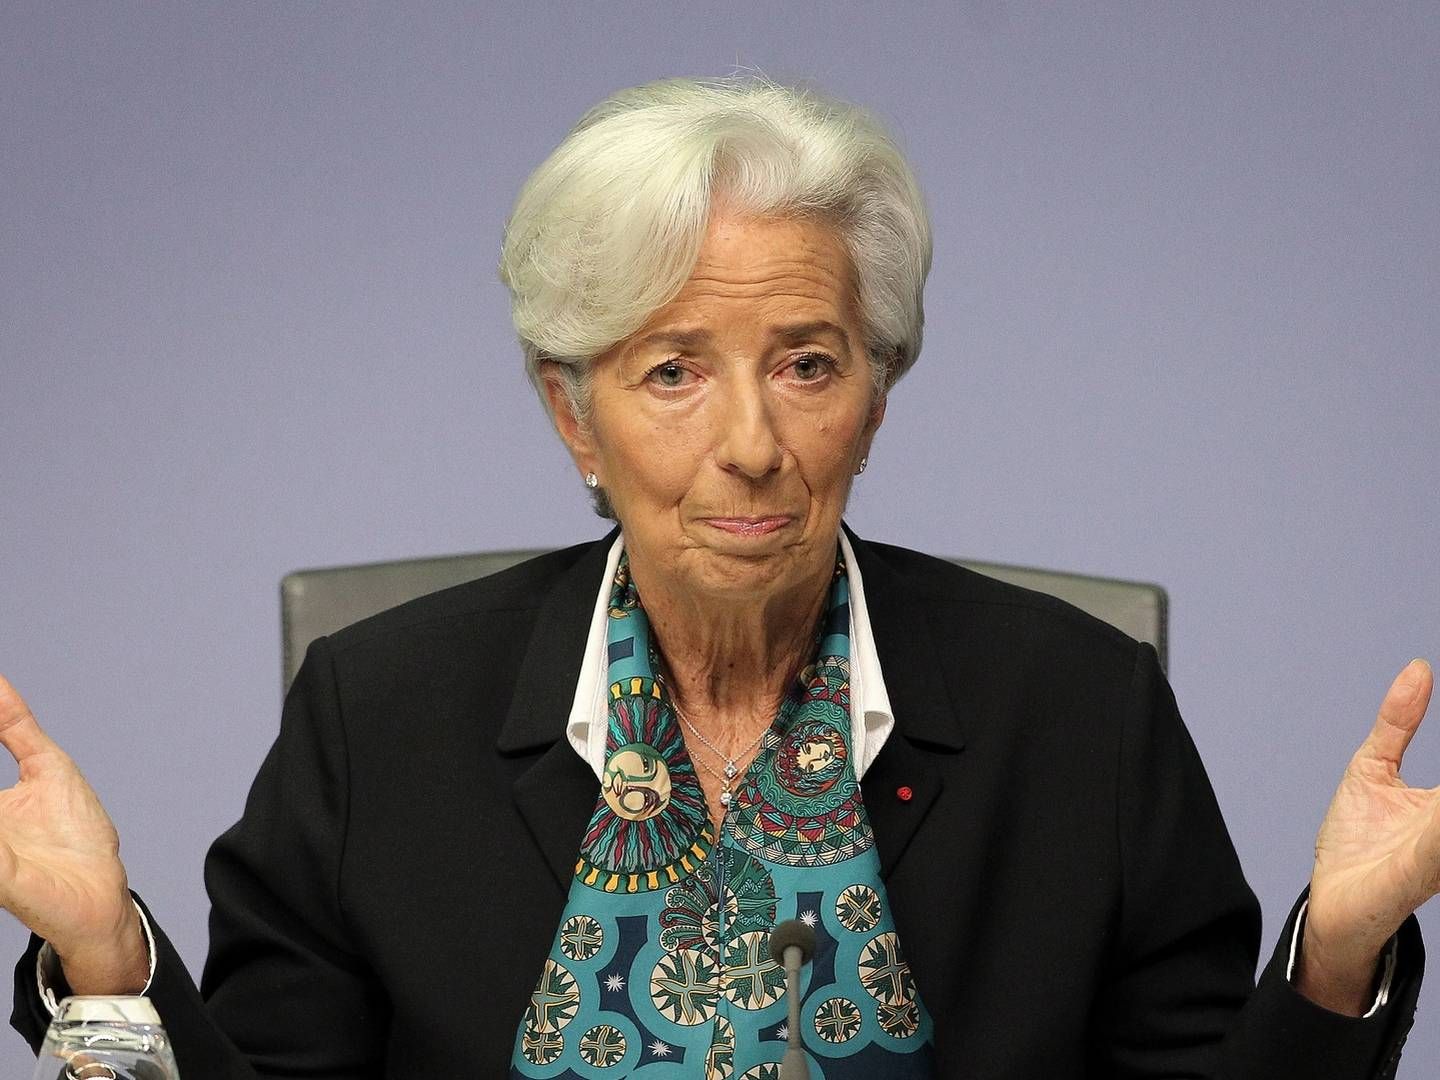 ECB President Christine Lagarde said on April 30 that continued and ambitious efforts are needed to fight the crisis. Germany’s participation is critical for the success of QE as the country’s own Bundesbank is the biggest buyer of debt under the program. | Photo: DANIEL ROLAND/AFP / AFP